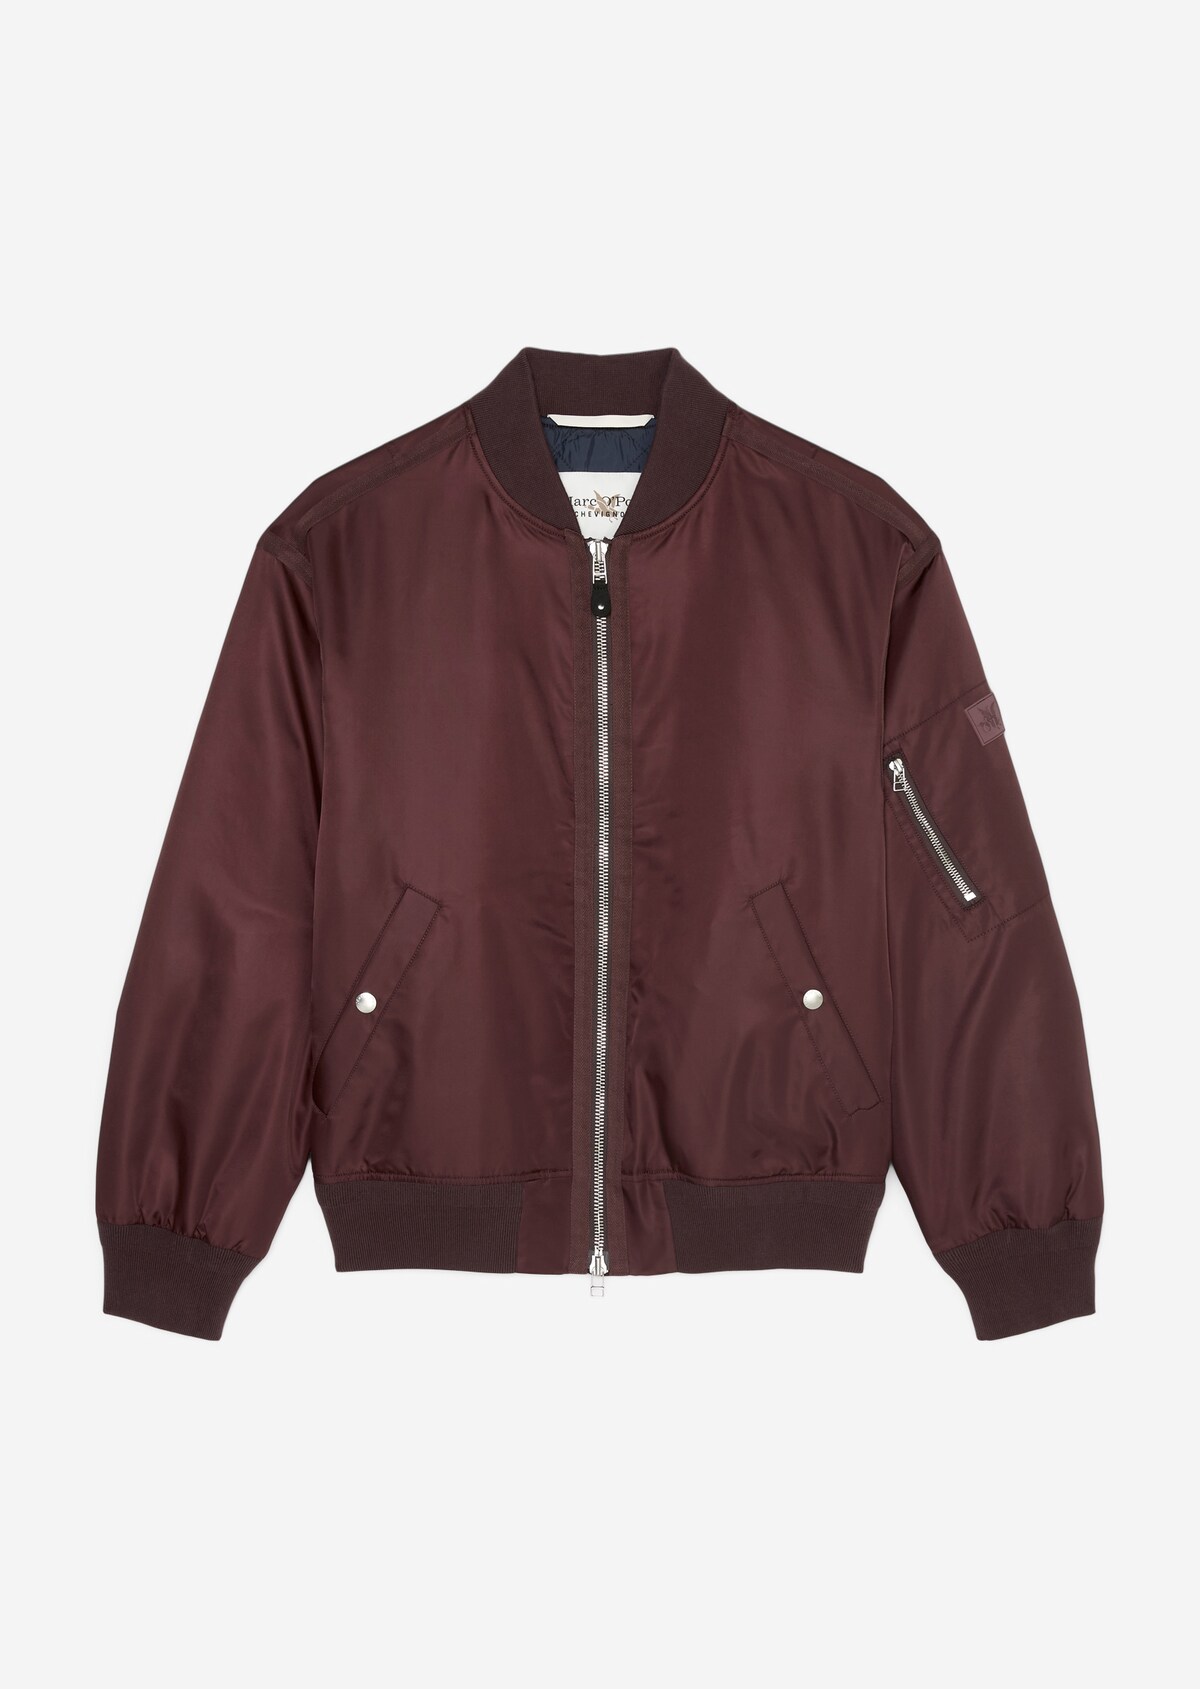 MO'P X CHEVIGNON: Pilot jacket relaxed with water-repellent surface ...